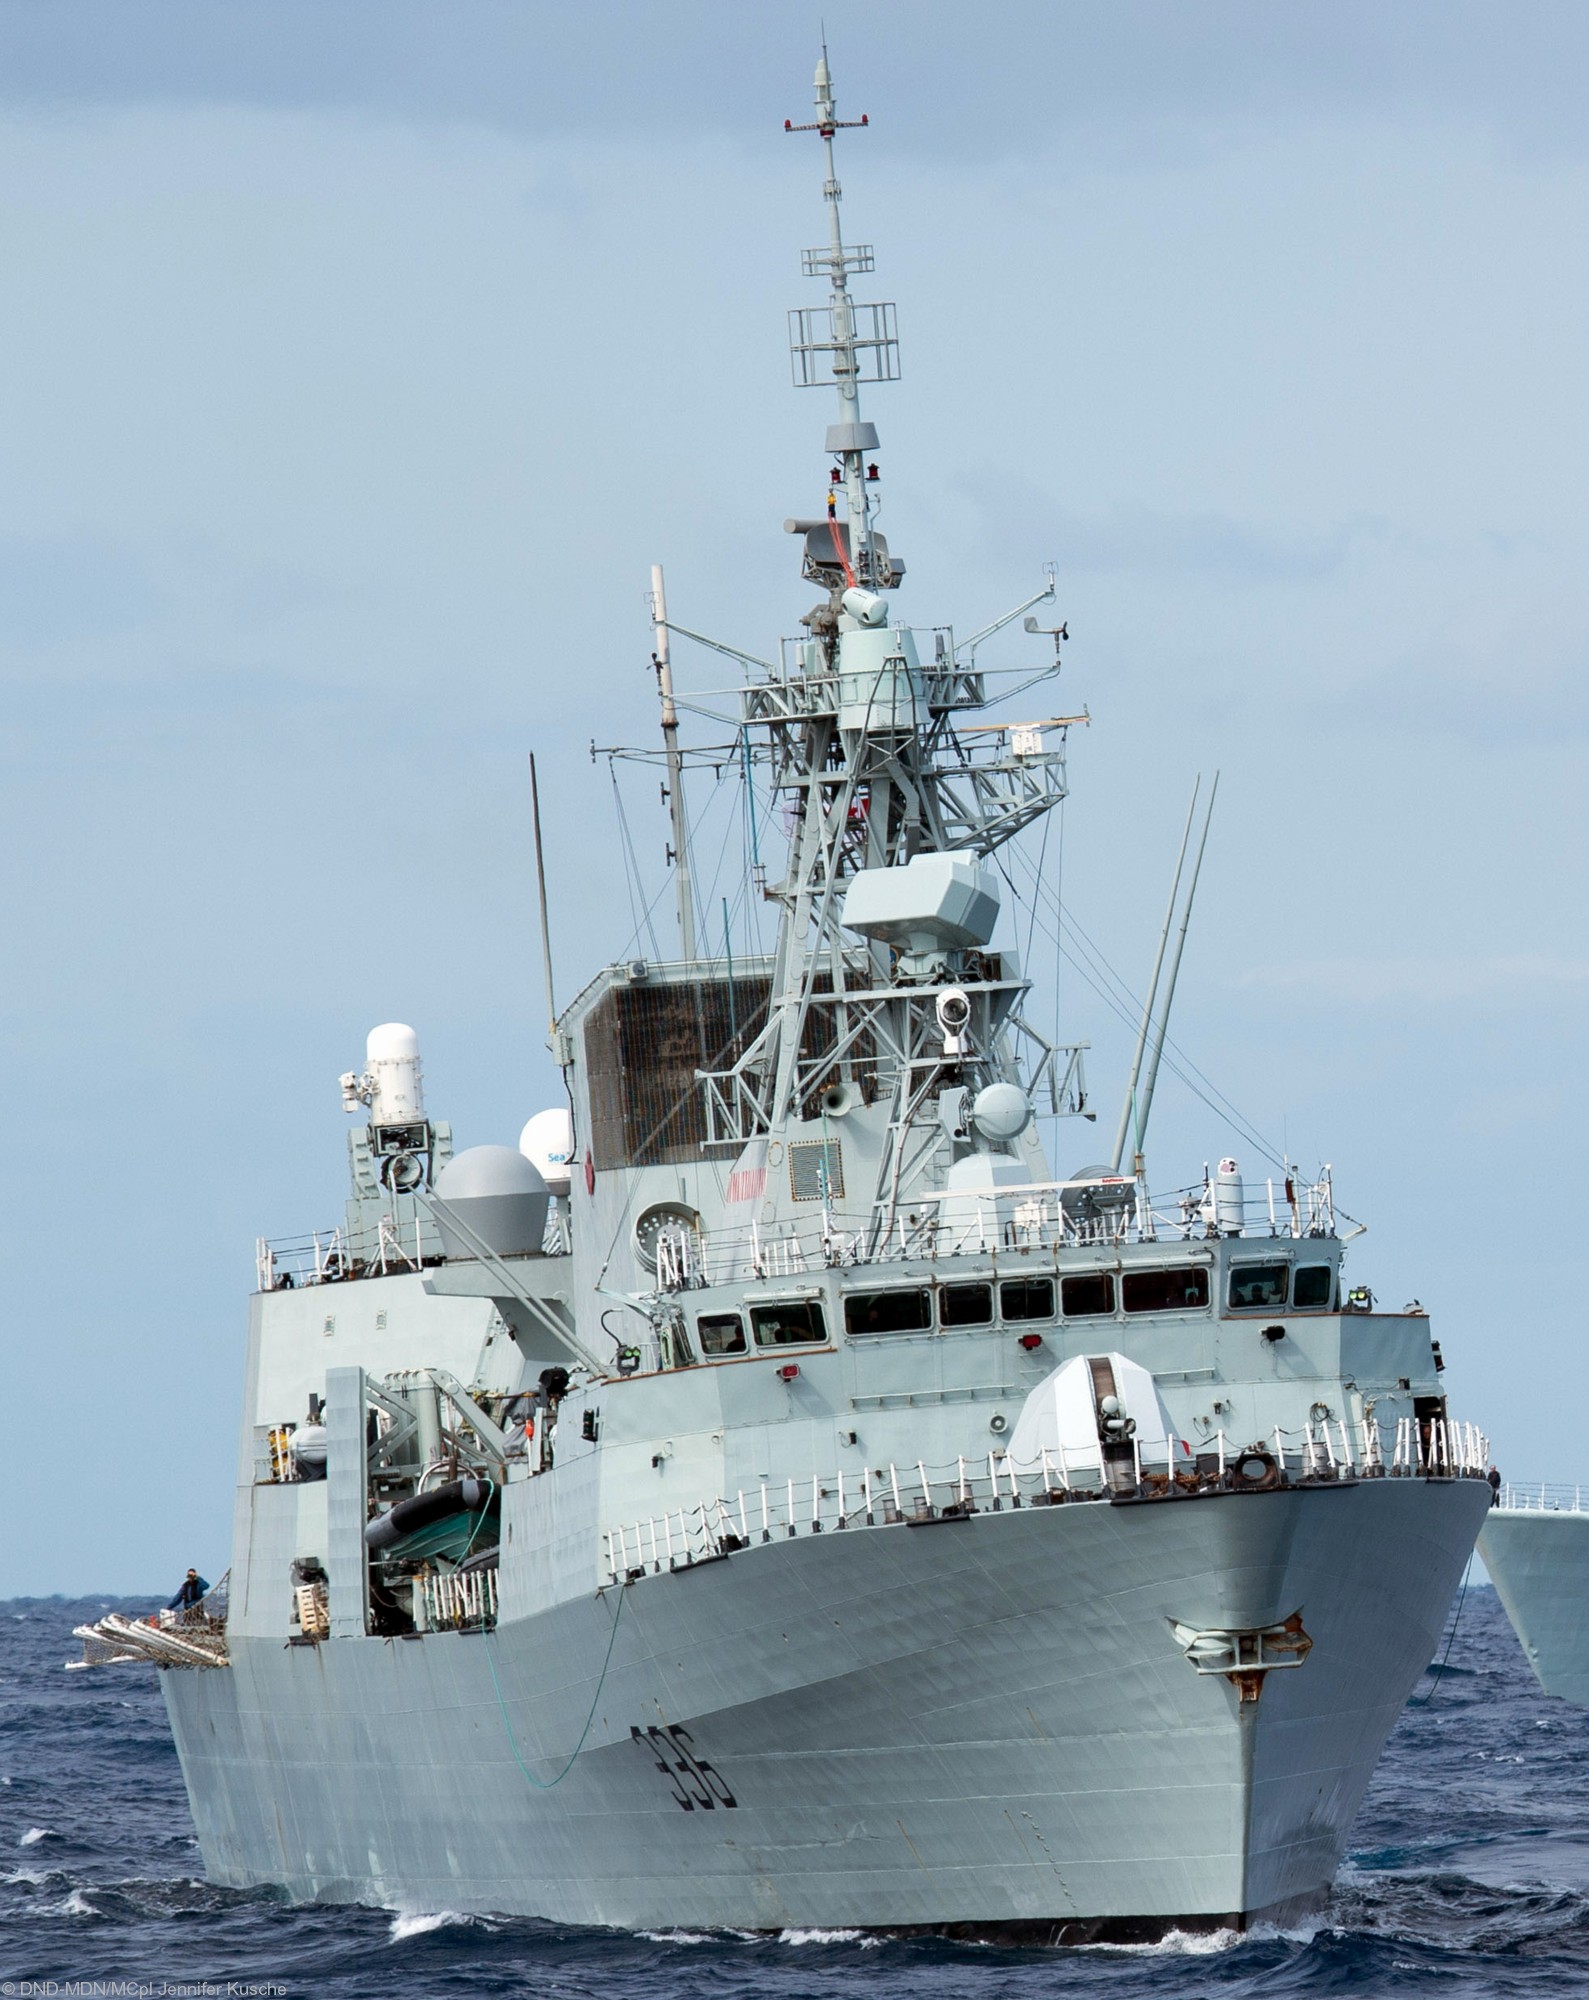 ffh-336 hmcs montreal halifax class helicopter patrol frigate ncsm royal canadian navy 48